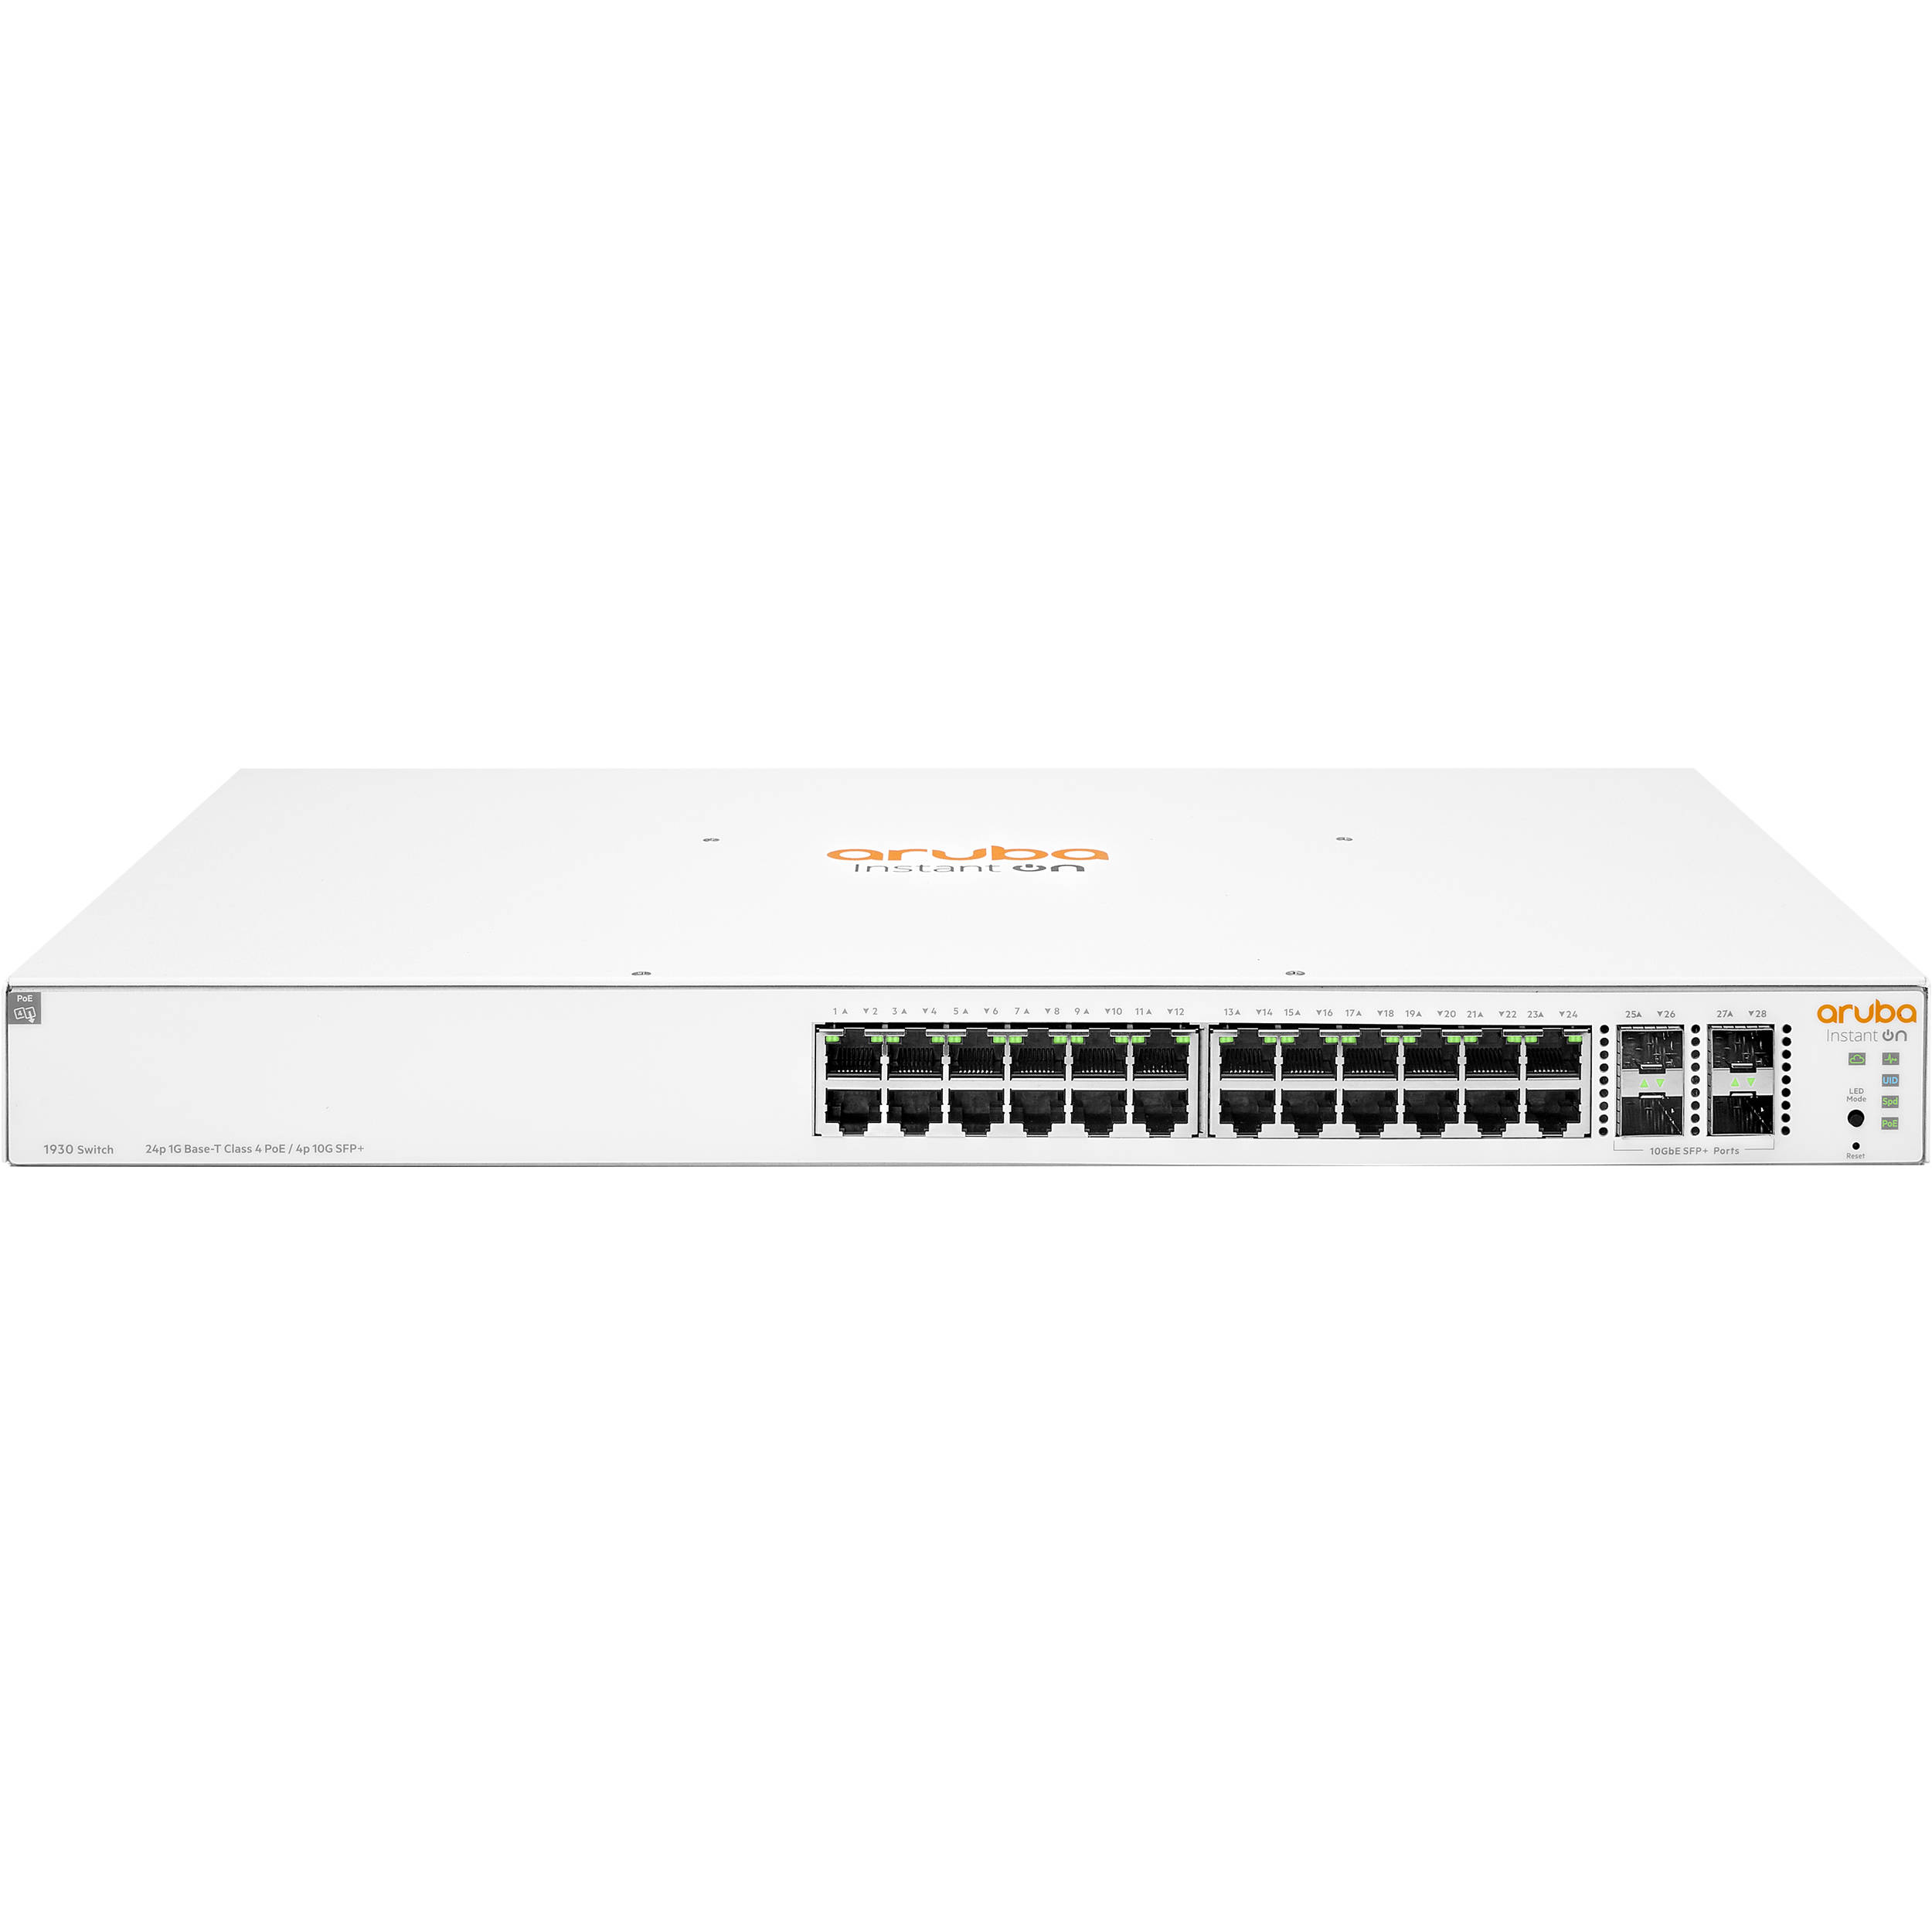 JL683A | 24-Port Gigabit PoE+ Compliant Managed Switch with 10Gb SFP+